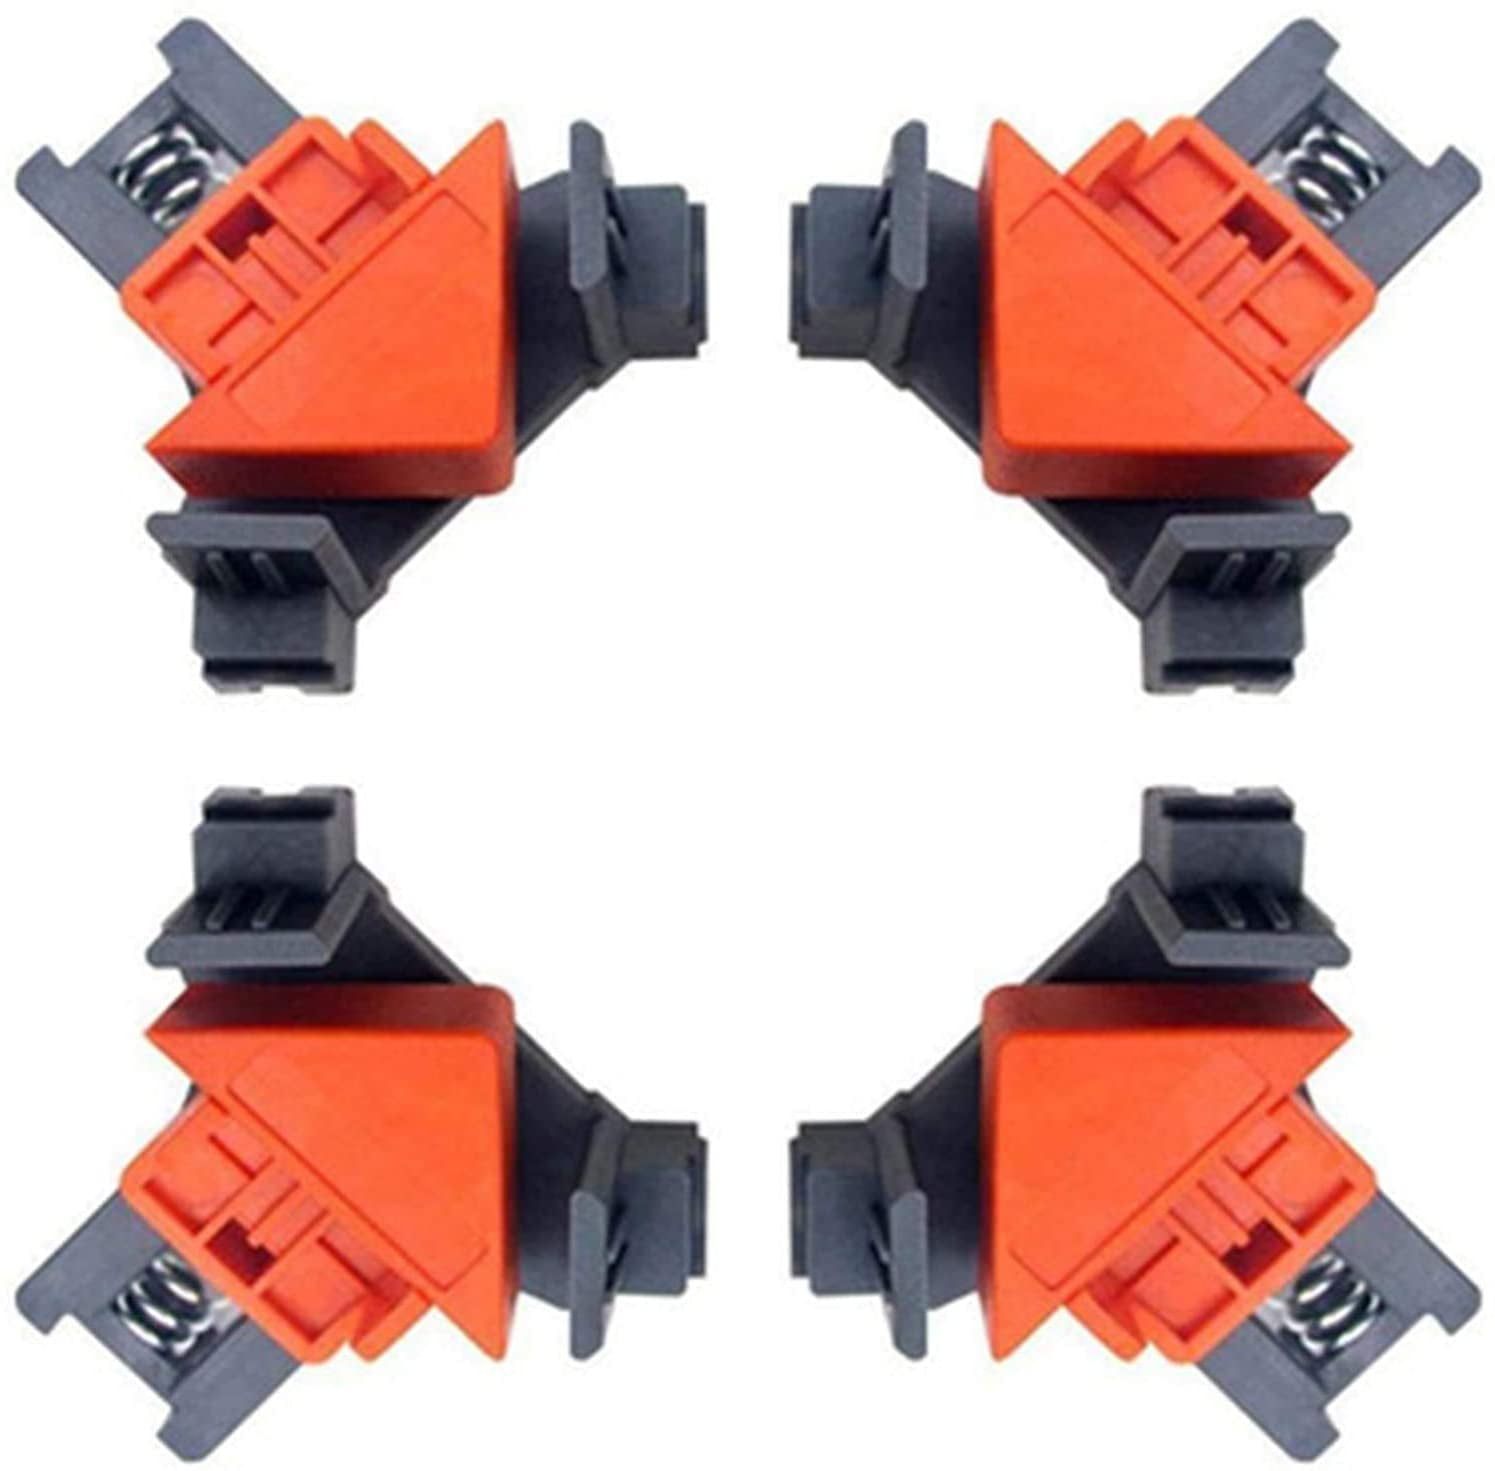 Right Angle Clip Fixer 4Pieces 90 Degree Angle Woodworking Corner Clip Suitable for Fixing 5-22mm /10-22mm Board